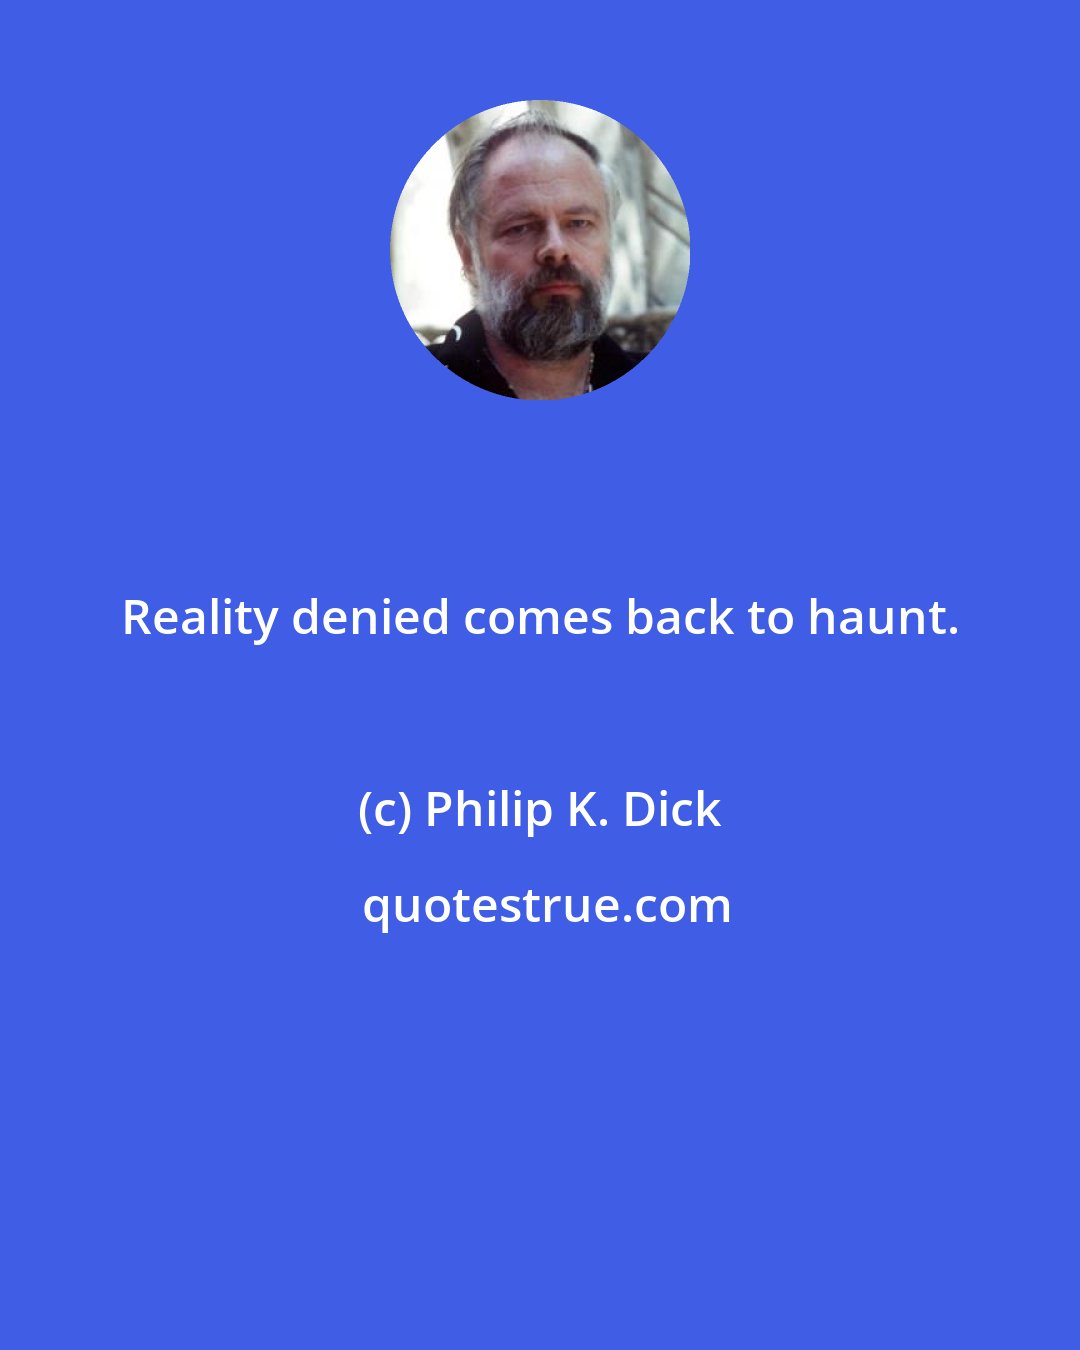 Philip K. Dick: Reality denied comes back to haunt.